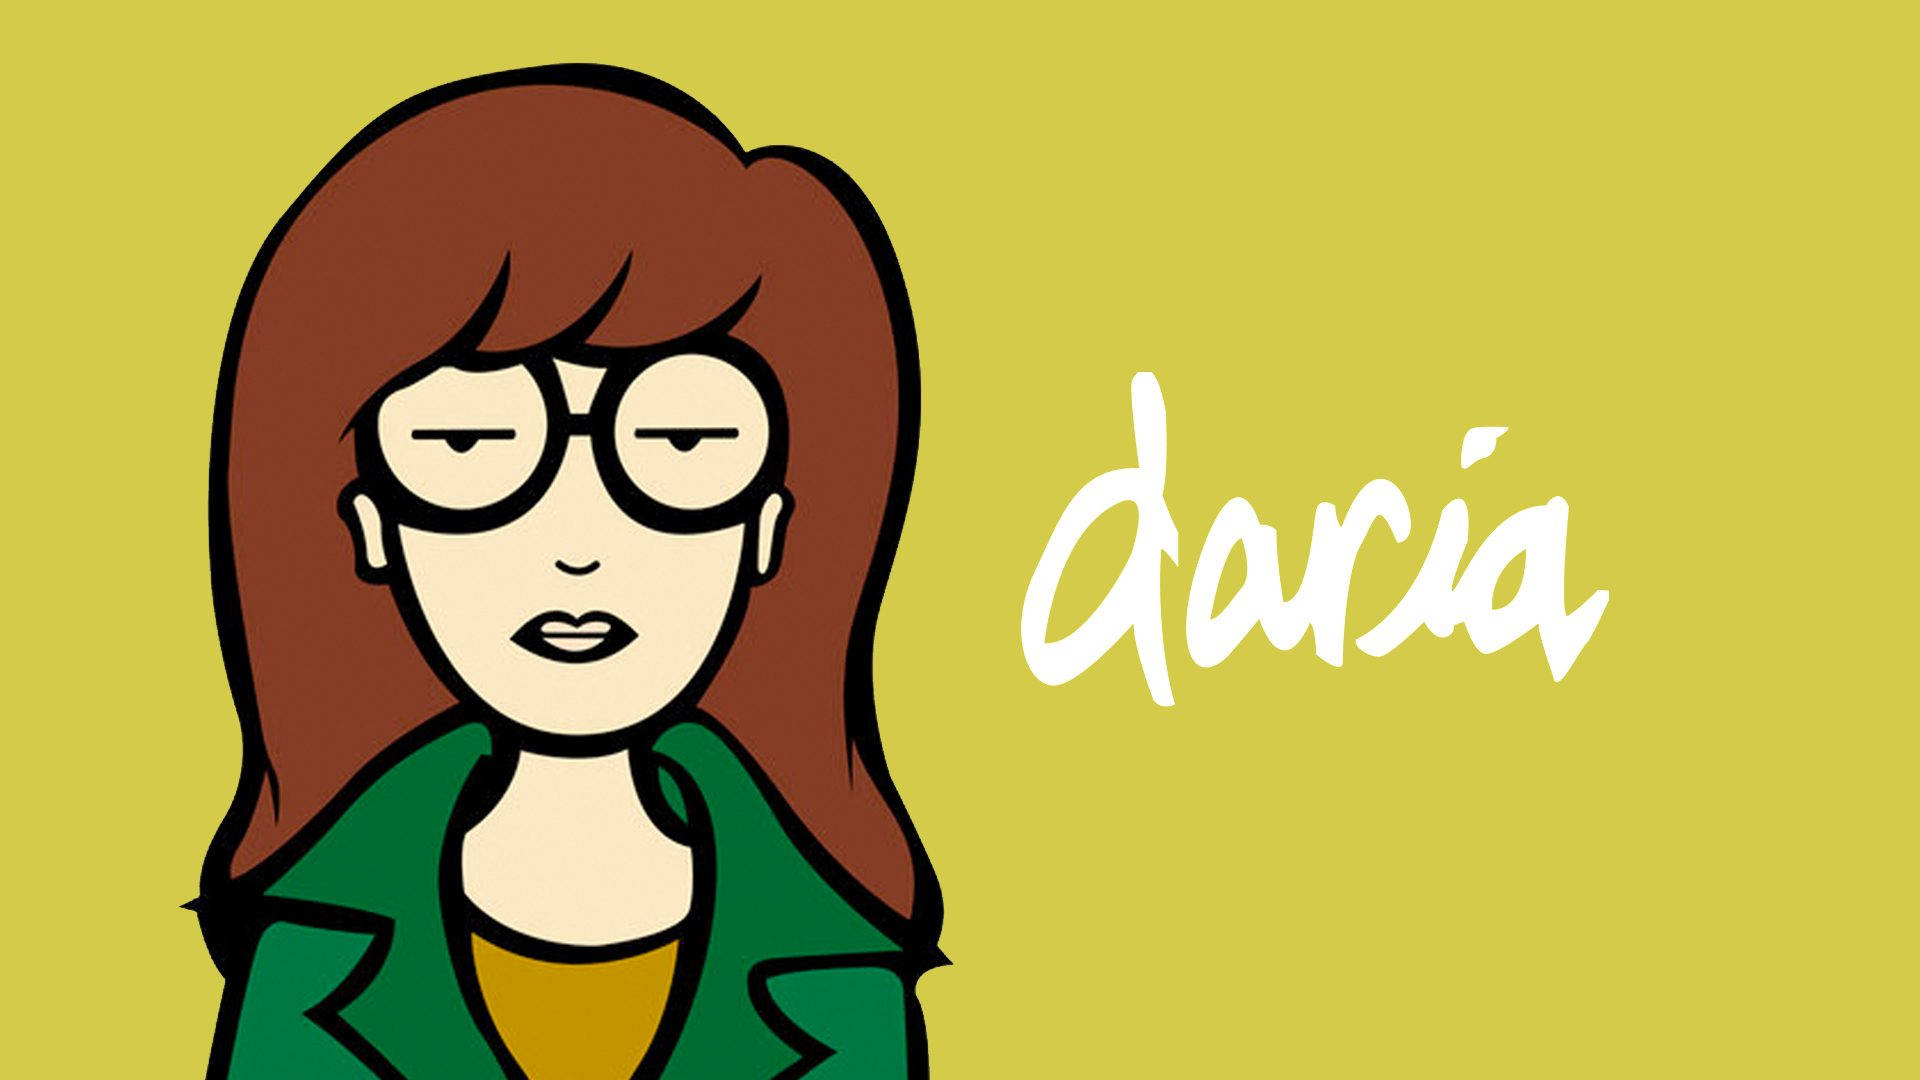 Daria Poster In Yellow Background